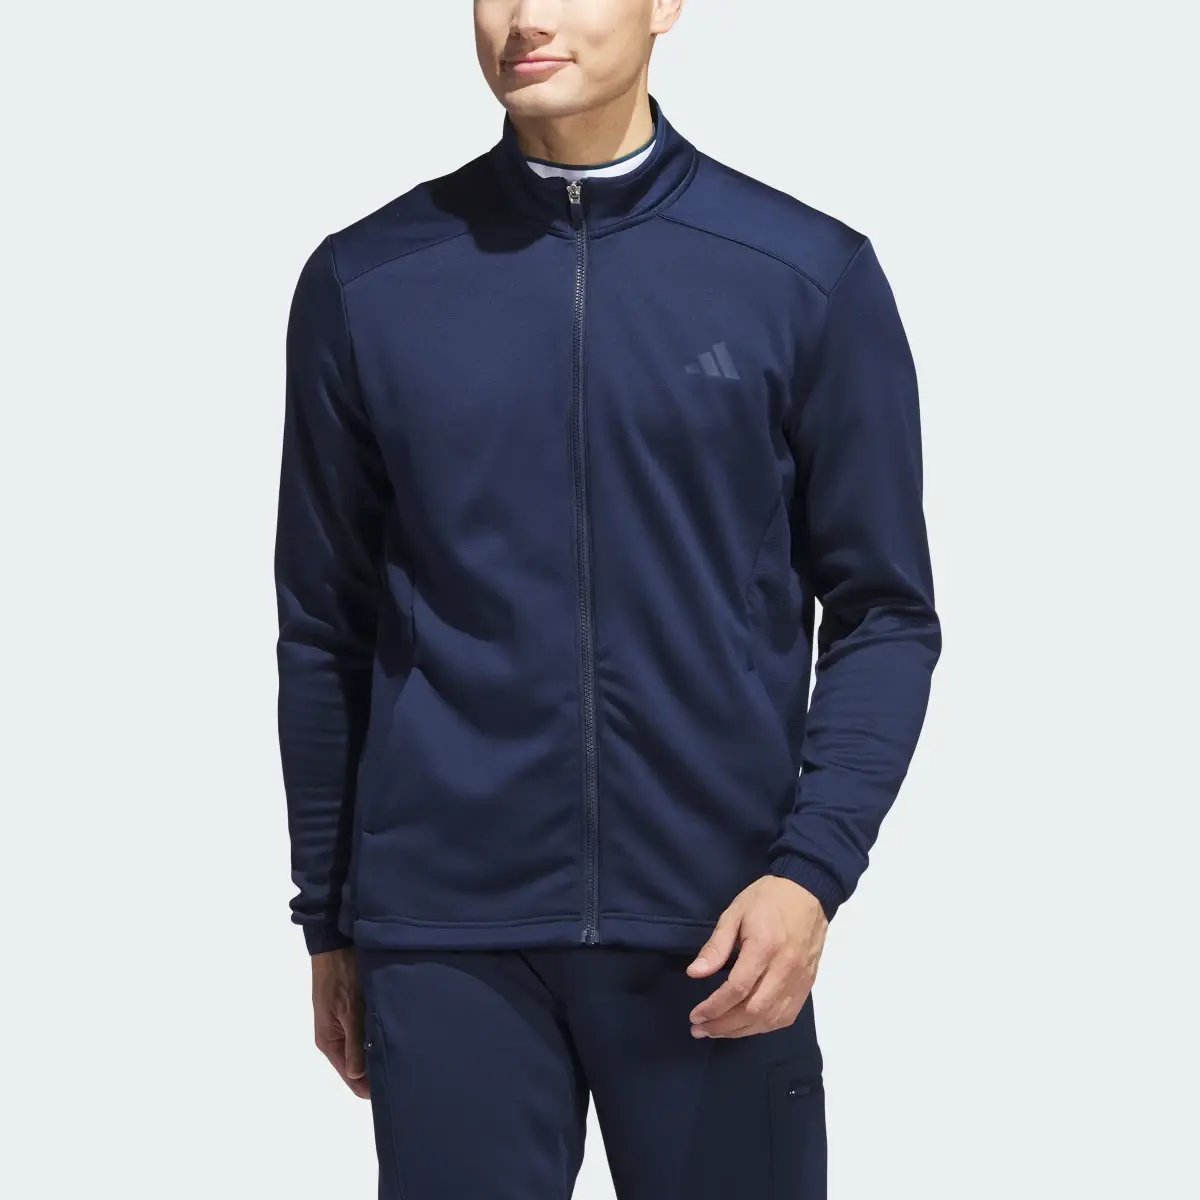 Adidas COLD.RDY Full-Zip Jacket. 1